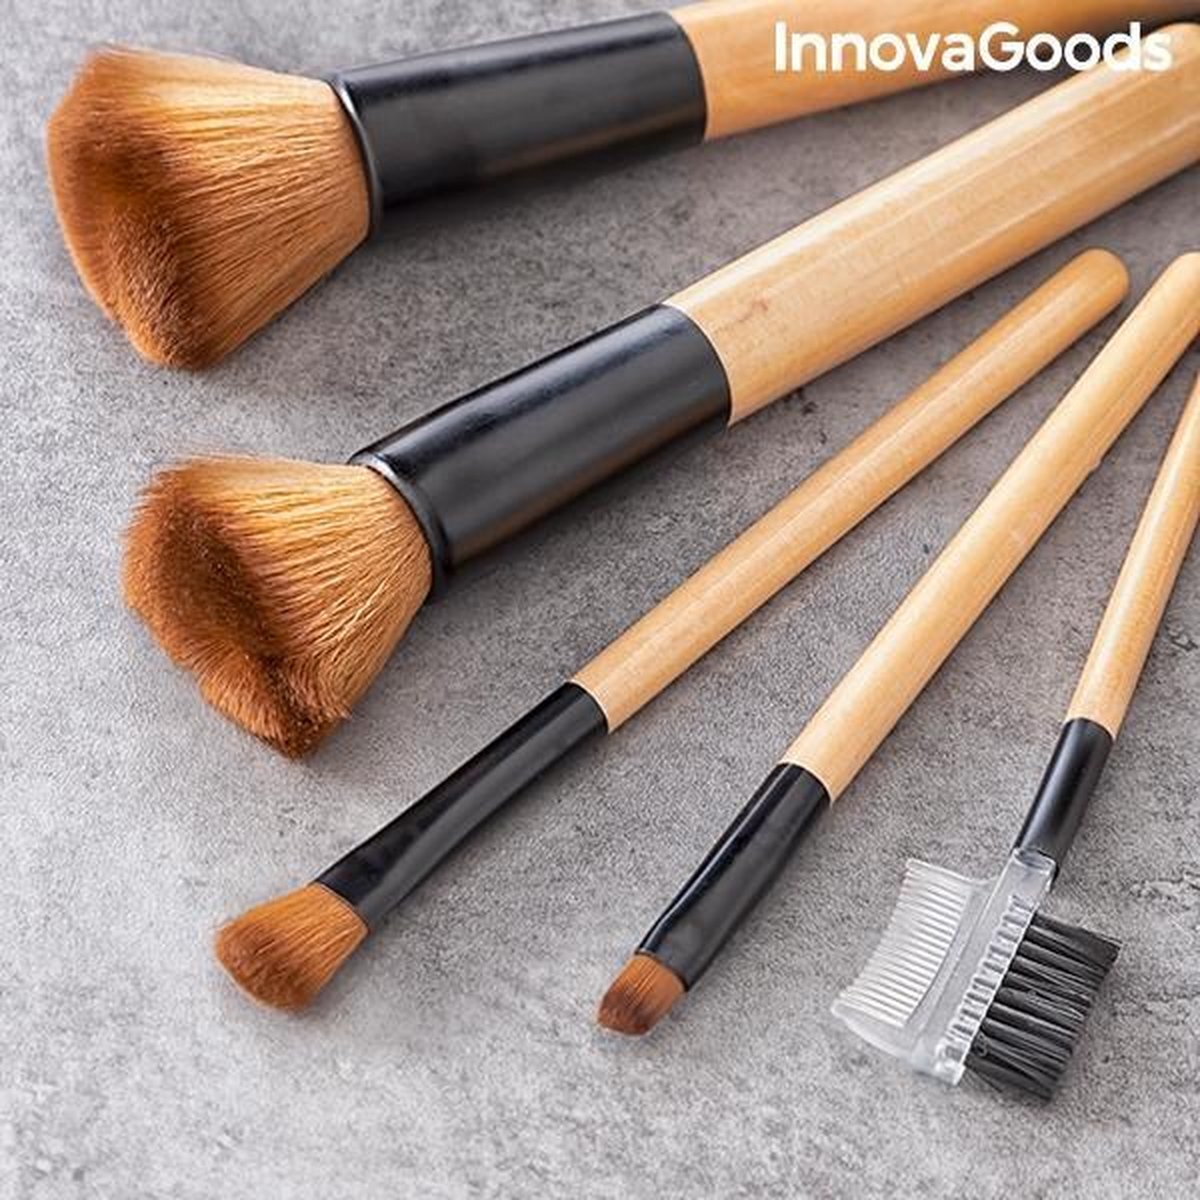 Innovagoods Set Of Wooden Make-up Brushes With Carrying Bag Miset Innovagoods 5 Parts